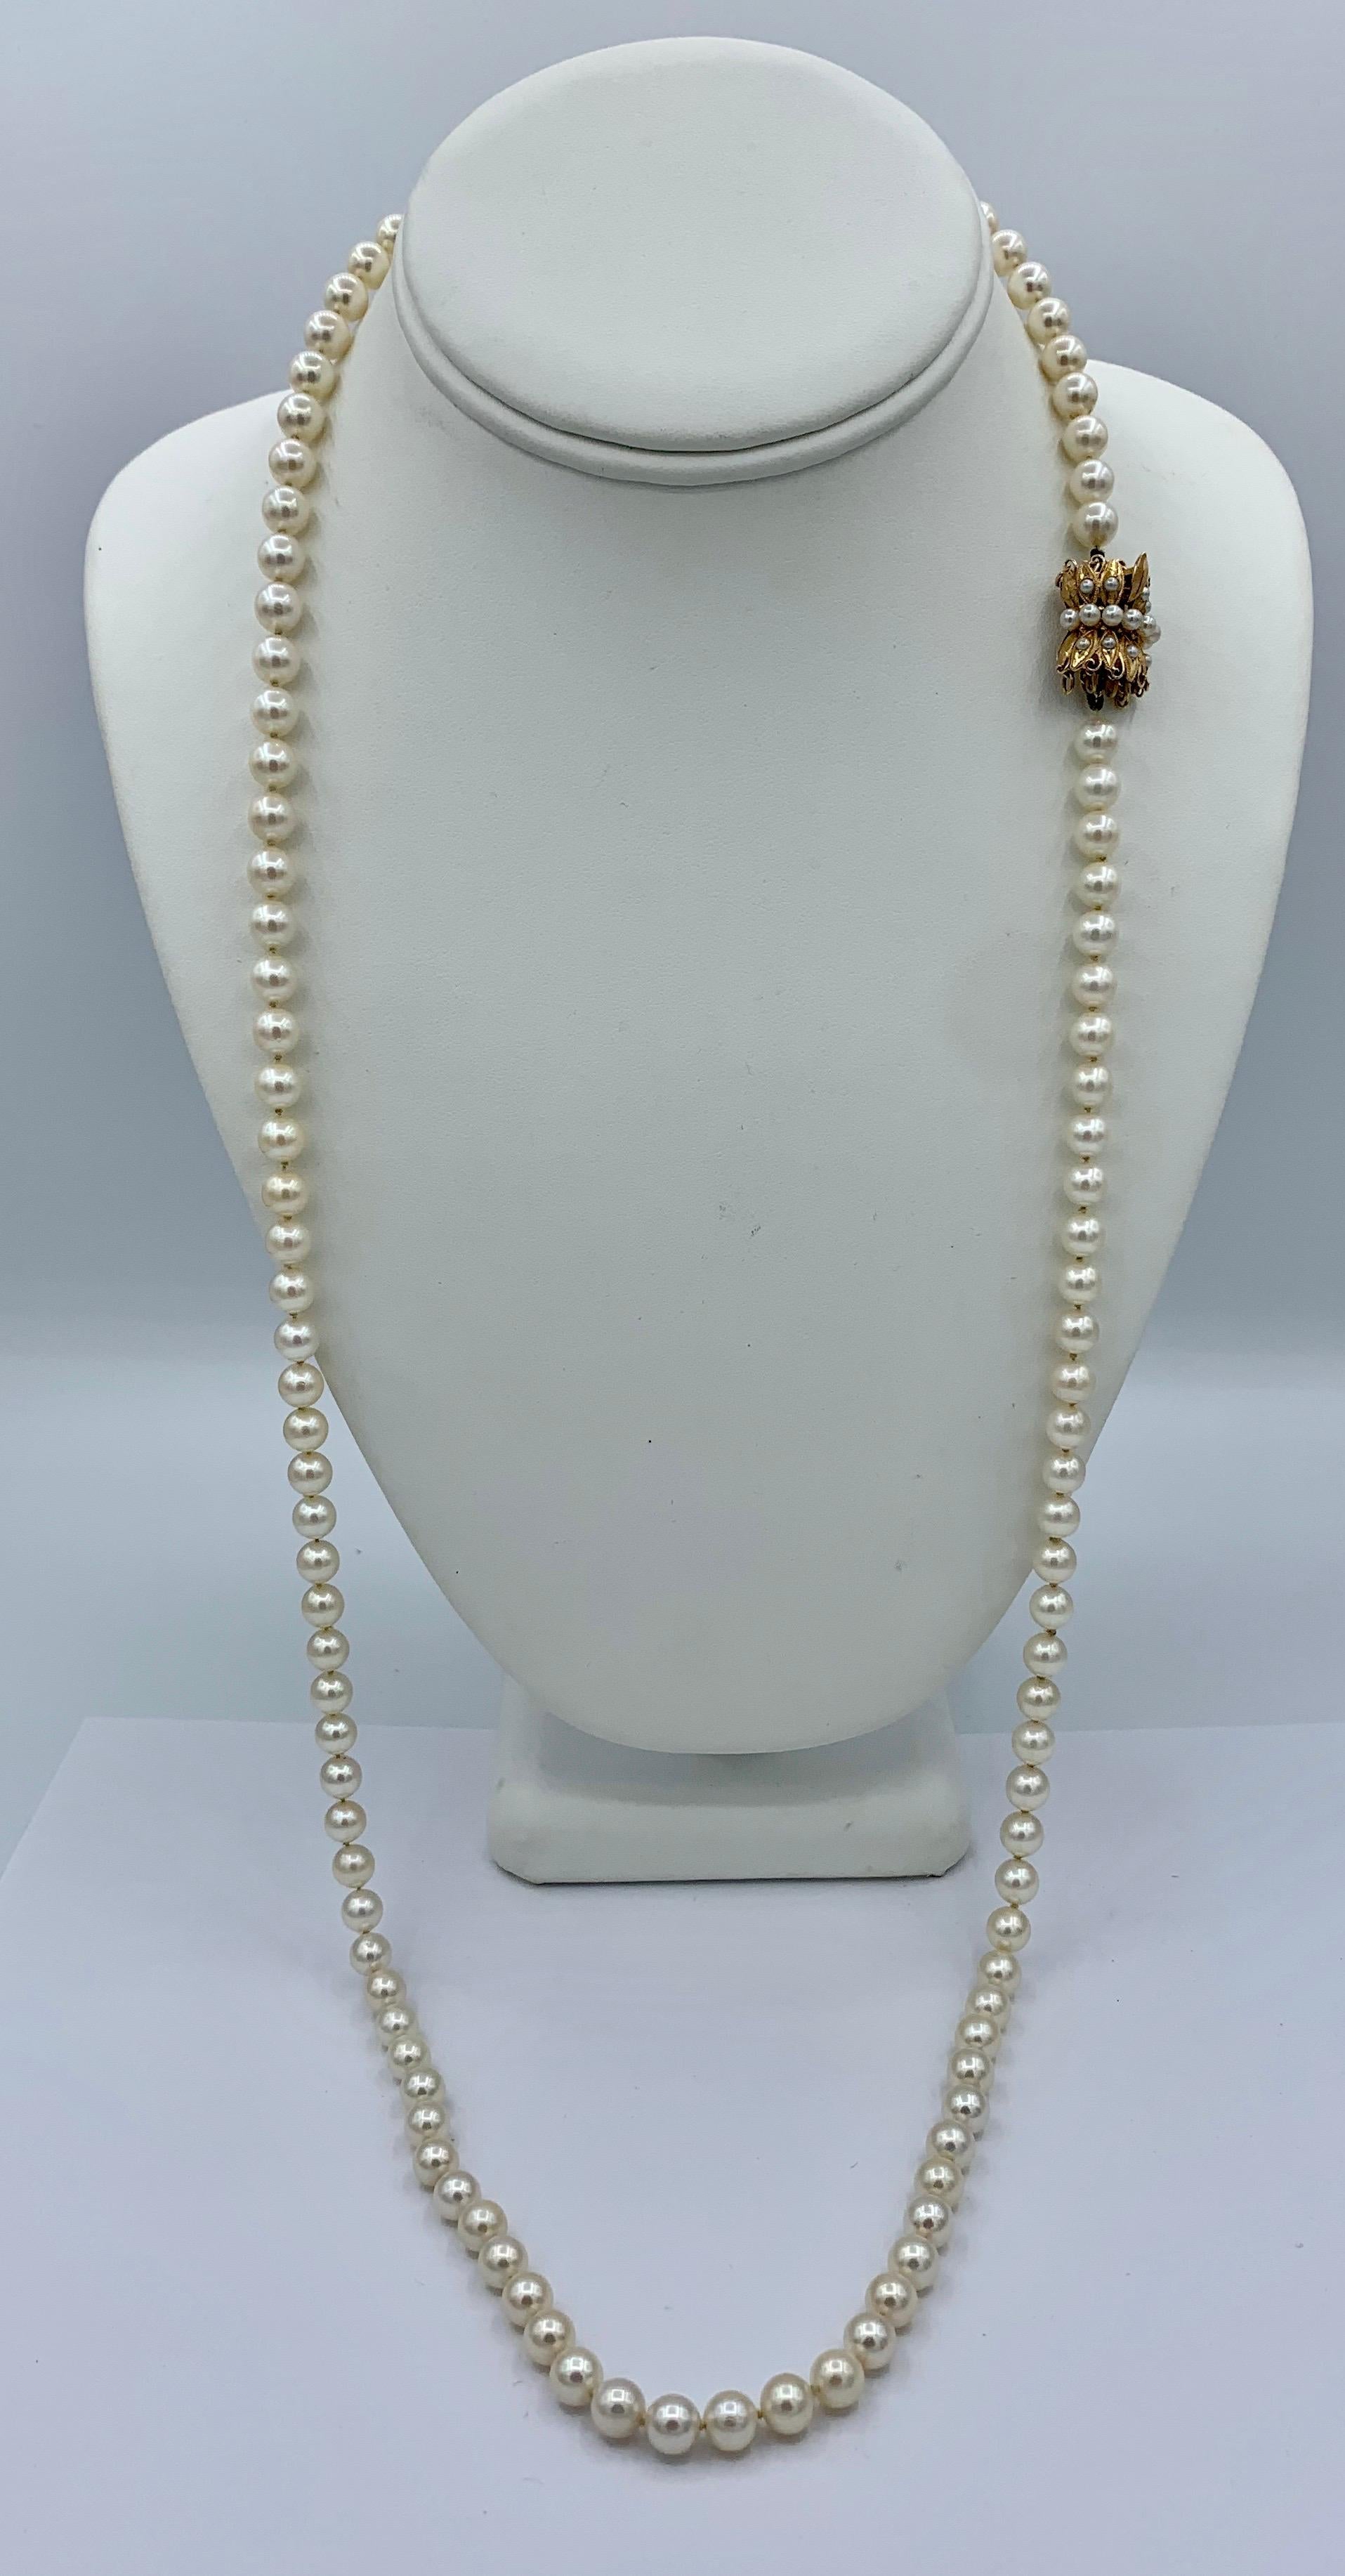 This is a magnificent 33.5 inch long Cultured Pearl Necklace with 6.5mm white pearls of great beauty from the Estate of Ambassador and Mrs. Evan G. Galbraith.  The stunning pearl necklace is a fabulous long length.  The pearls have a wonderful Retro